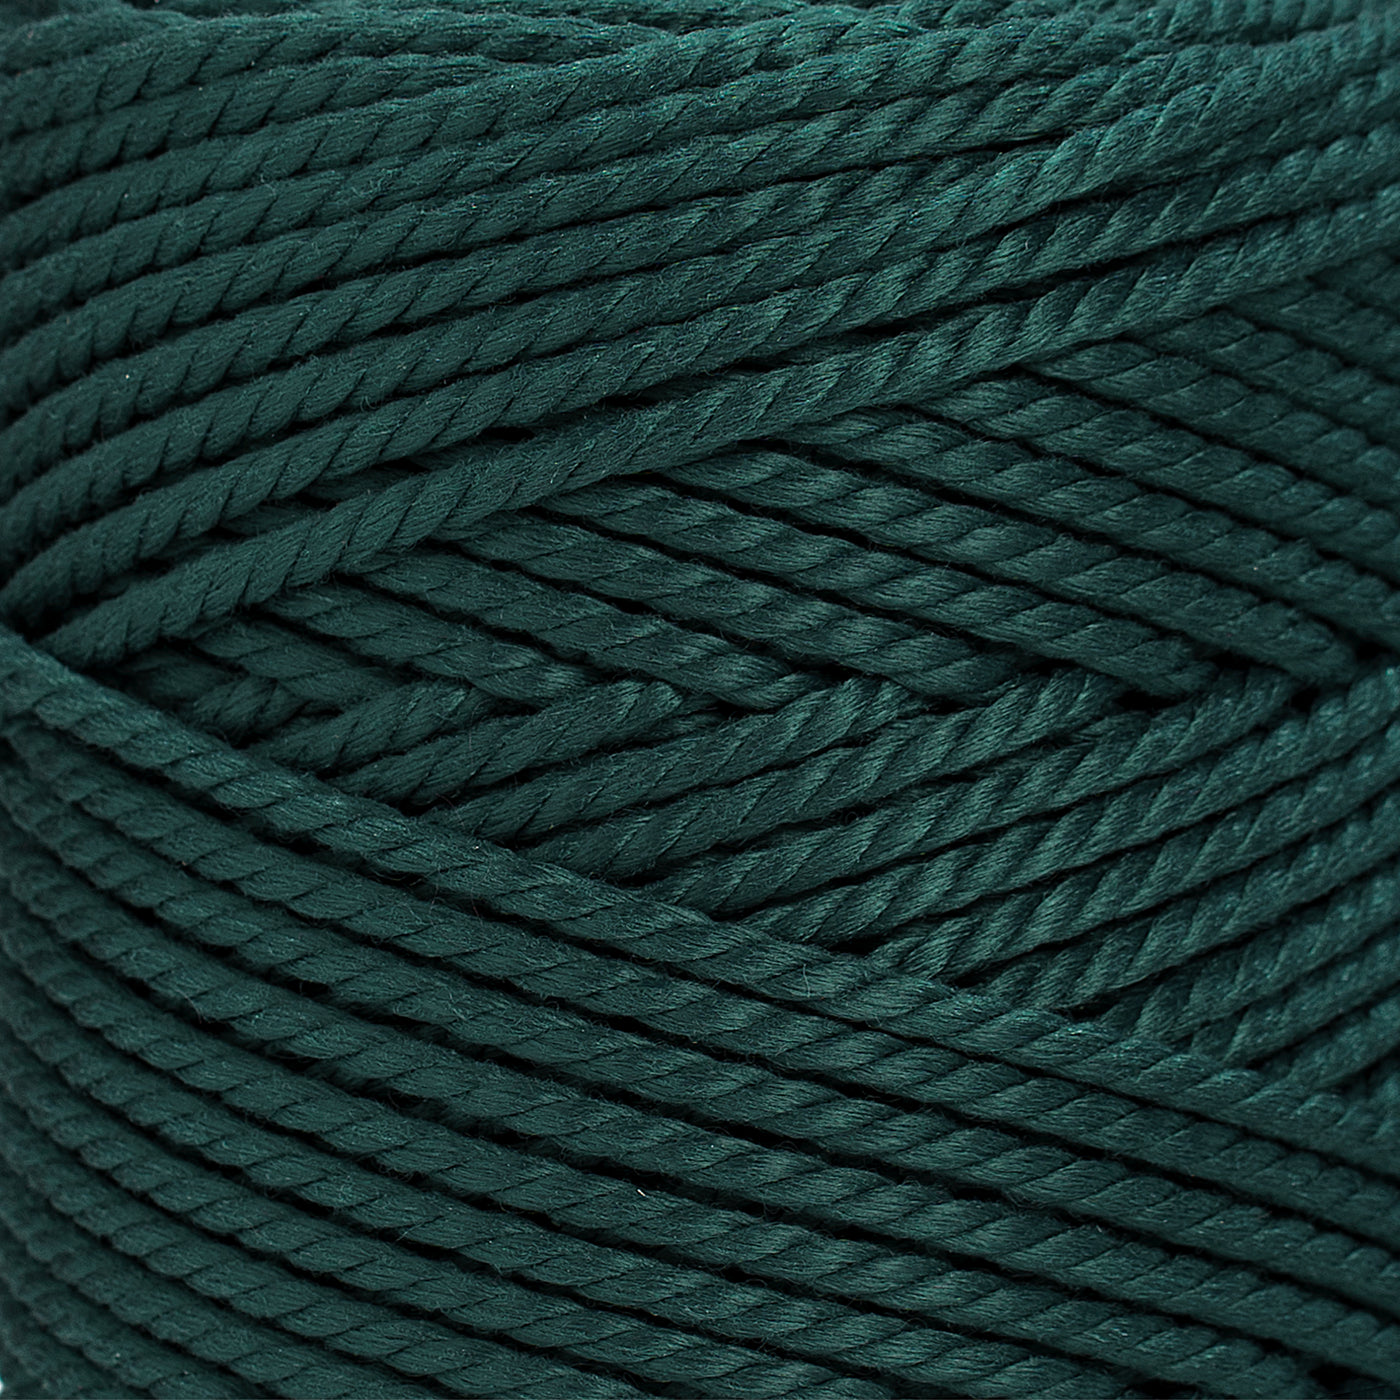 OUTDOOR RECYCLED CORD 3 MM - 3 PLY -  FOREST GREEN COLOR